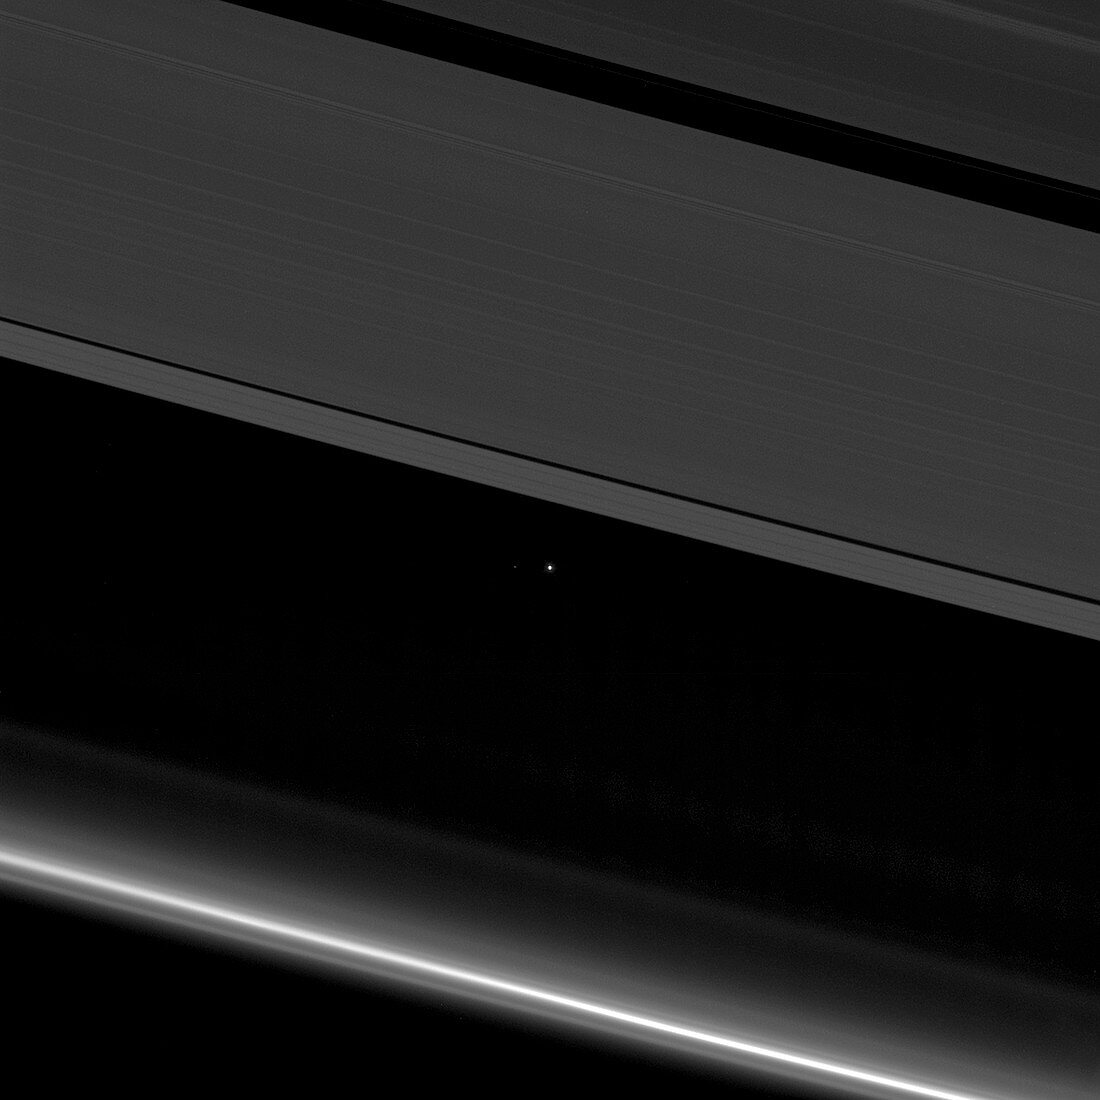 Earth from Saturn, Cassini image